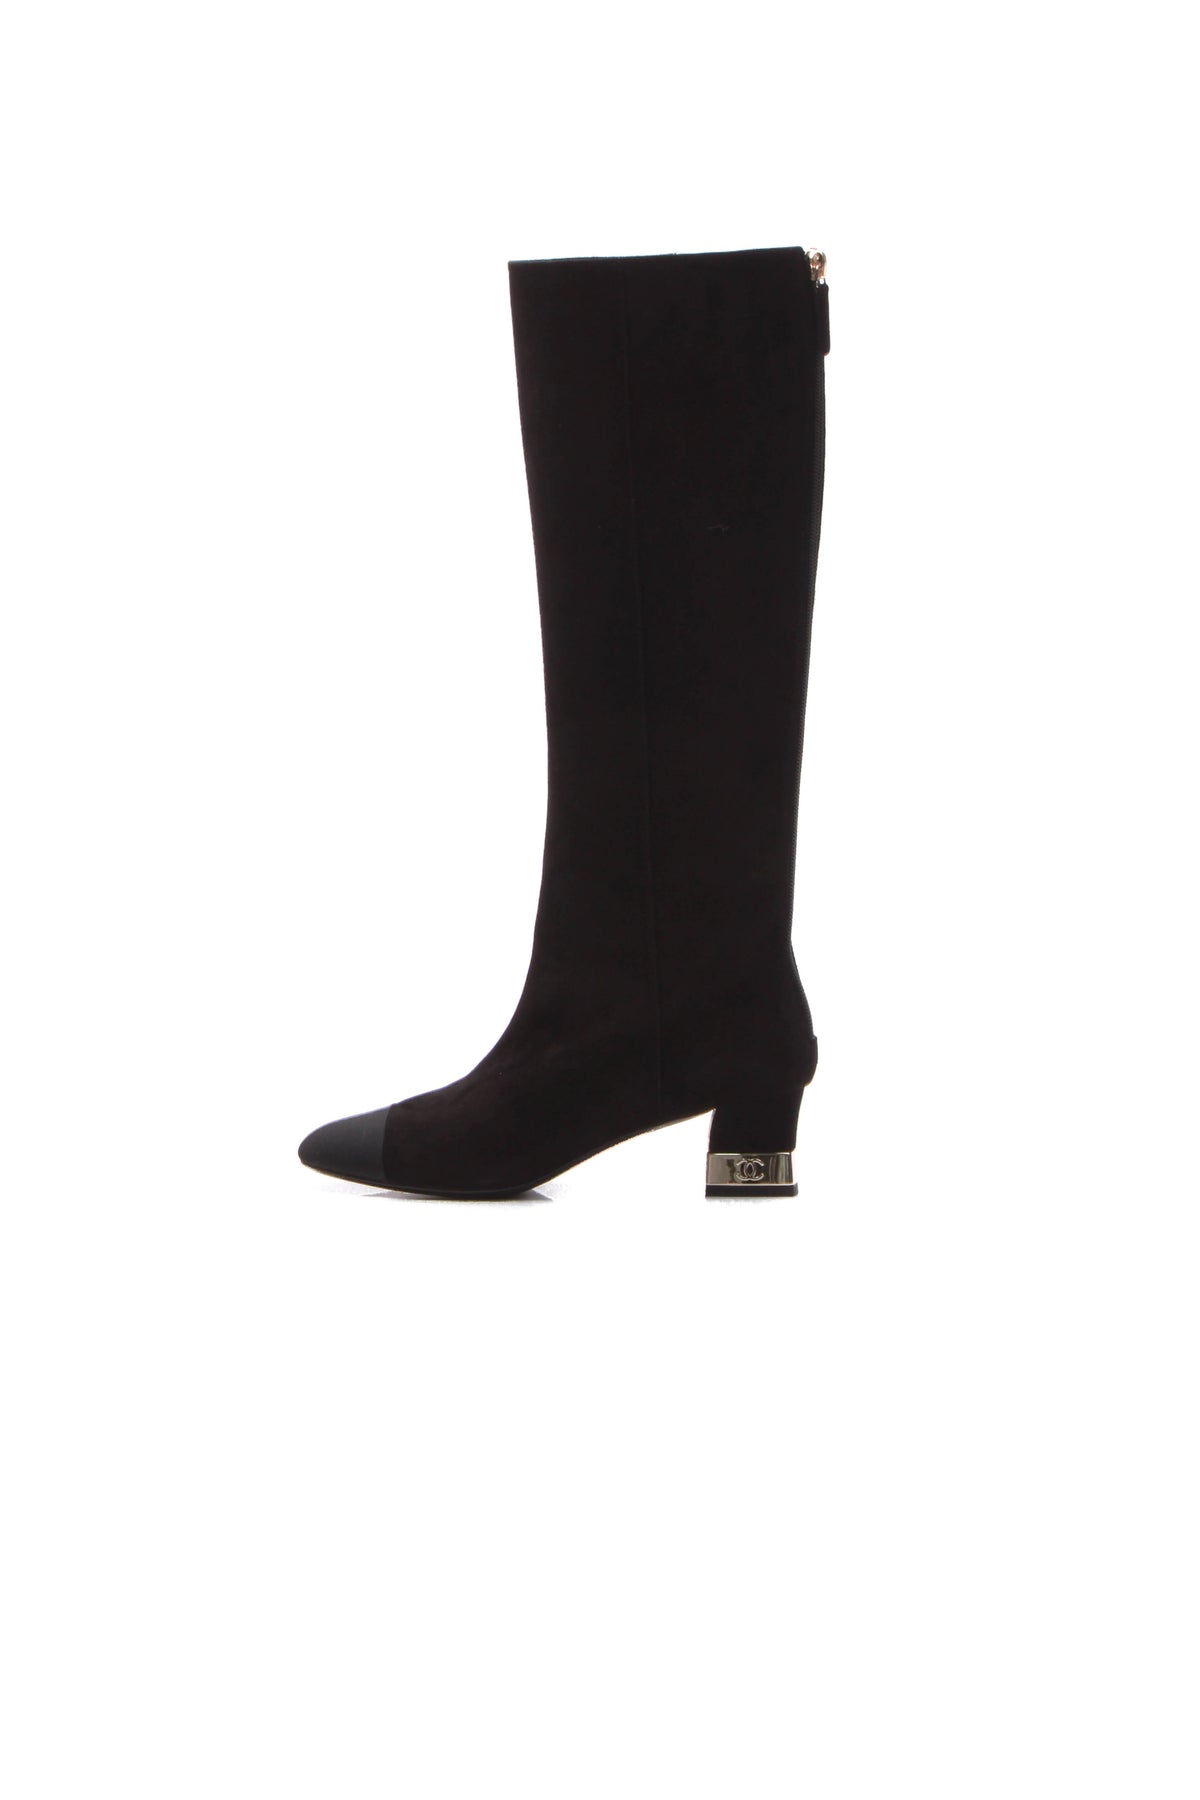 Chanel Cap Toe Knee High Boots - Size 36.5 - Couture USA